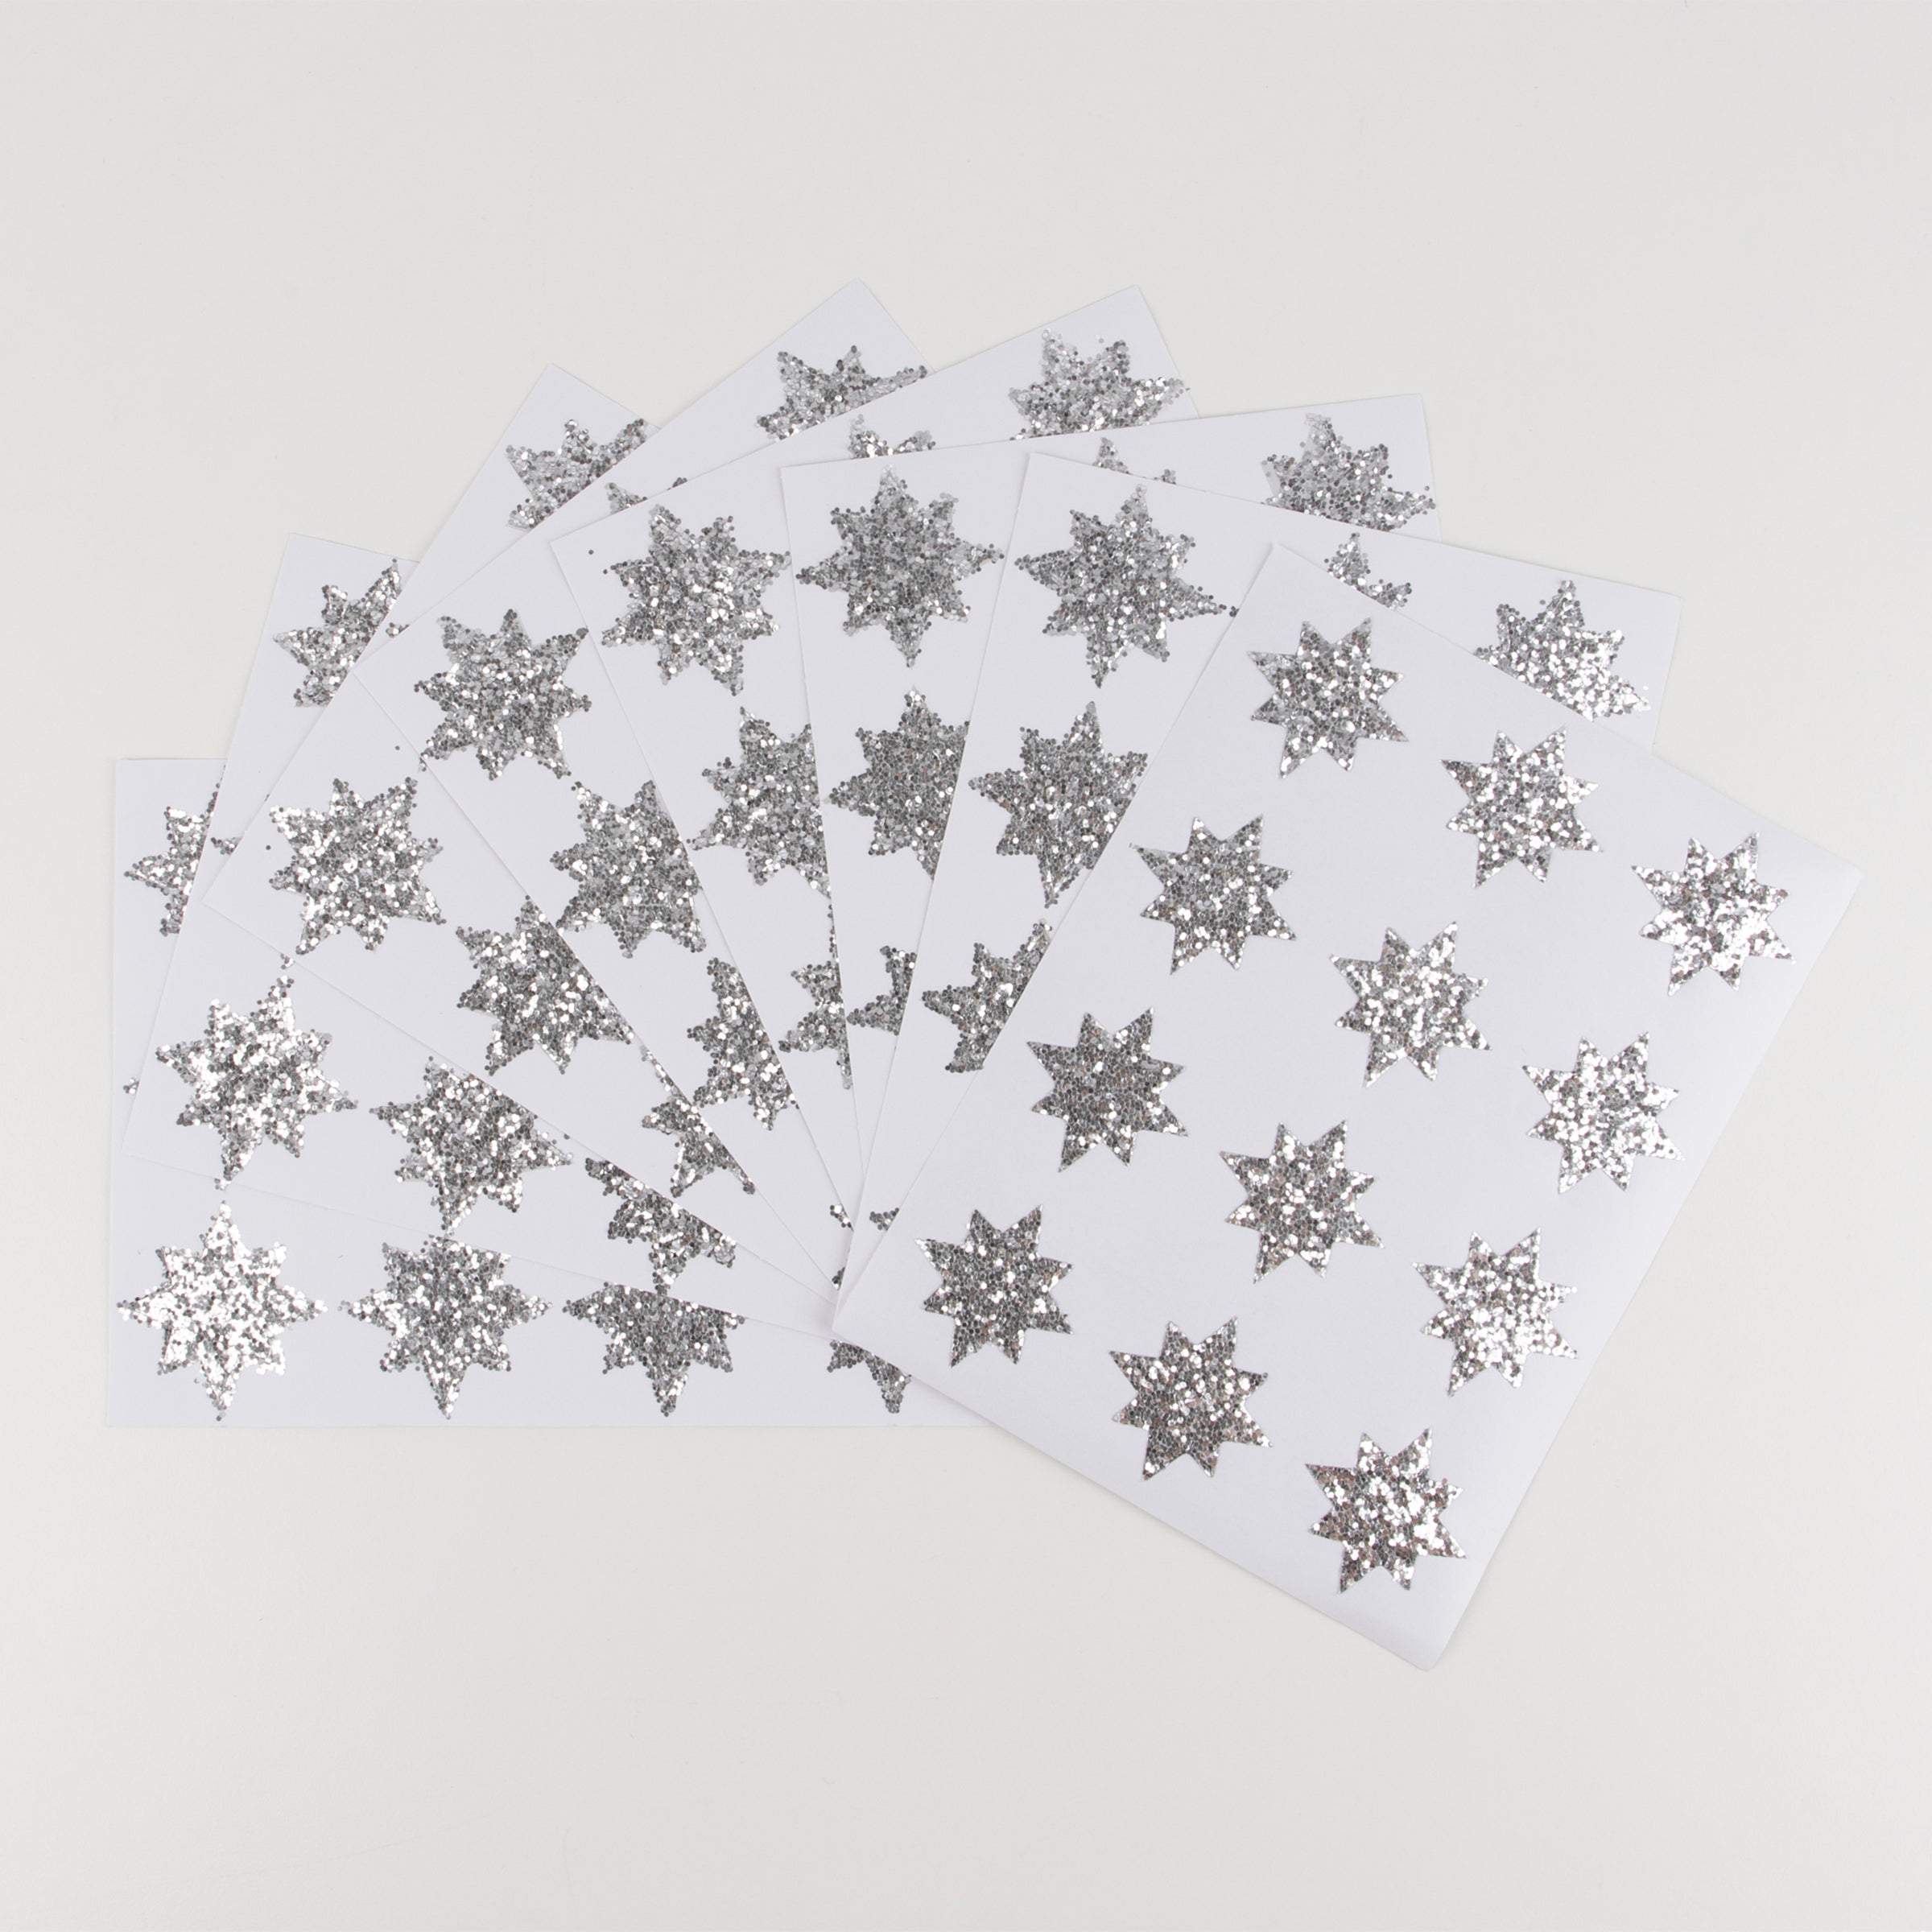 These fabulous glitter stickers, crafted with ECO silver glitter, are in the shape of a eight point stylish star.